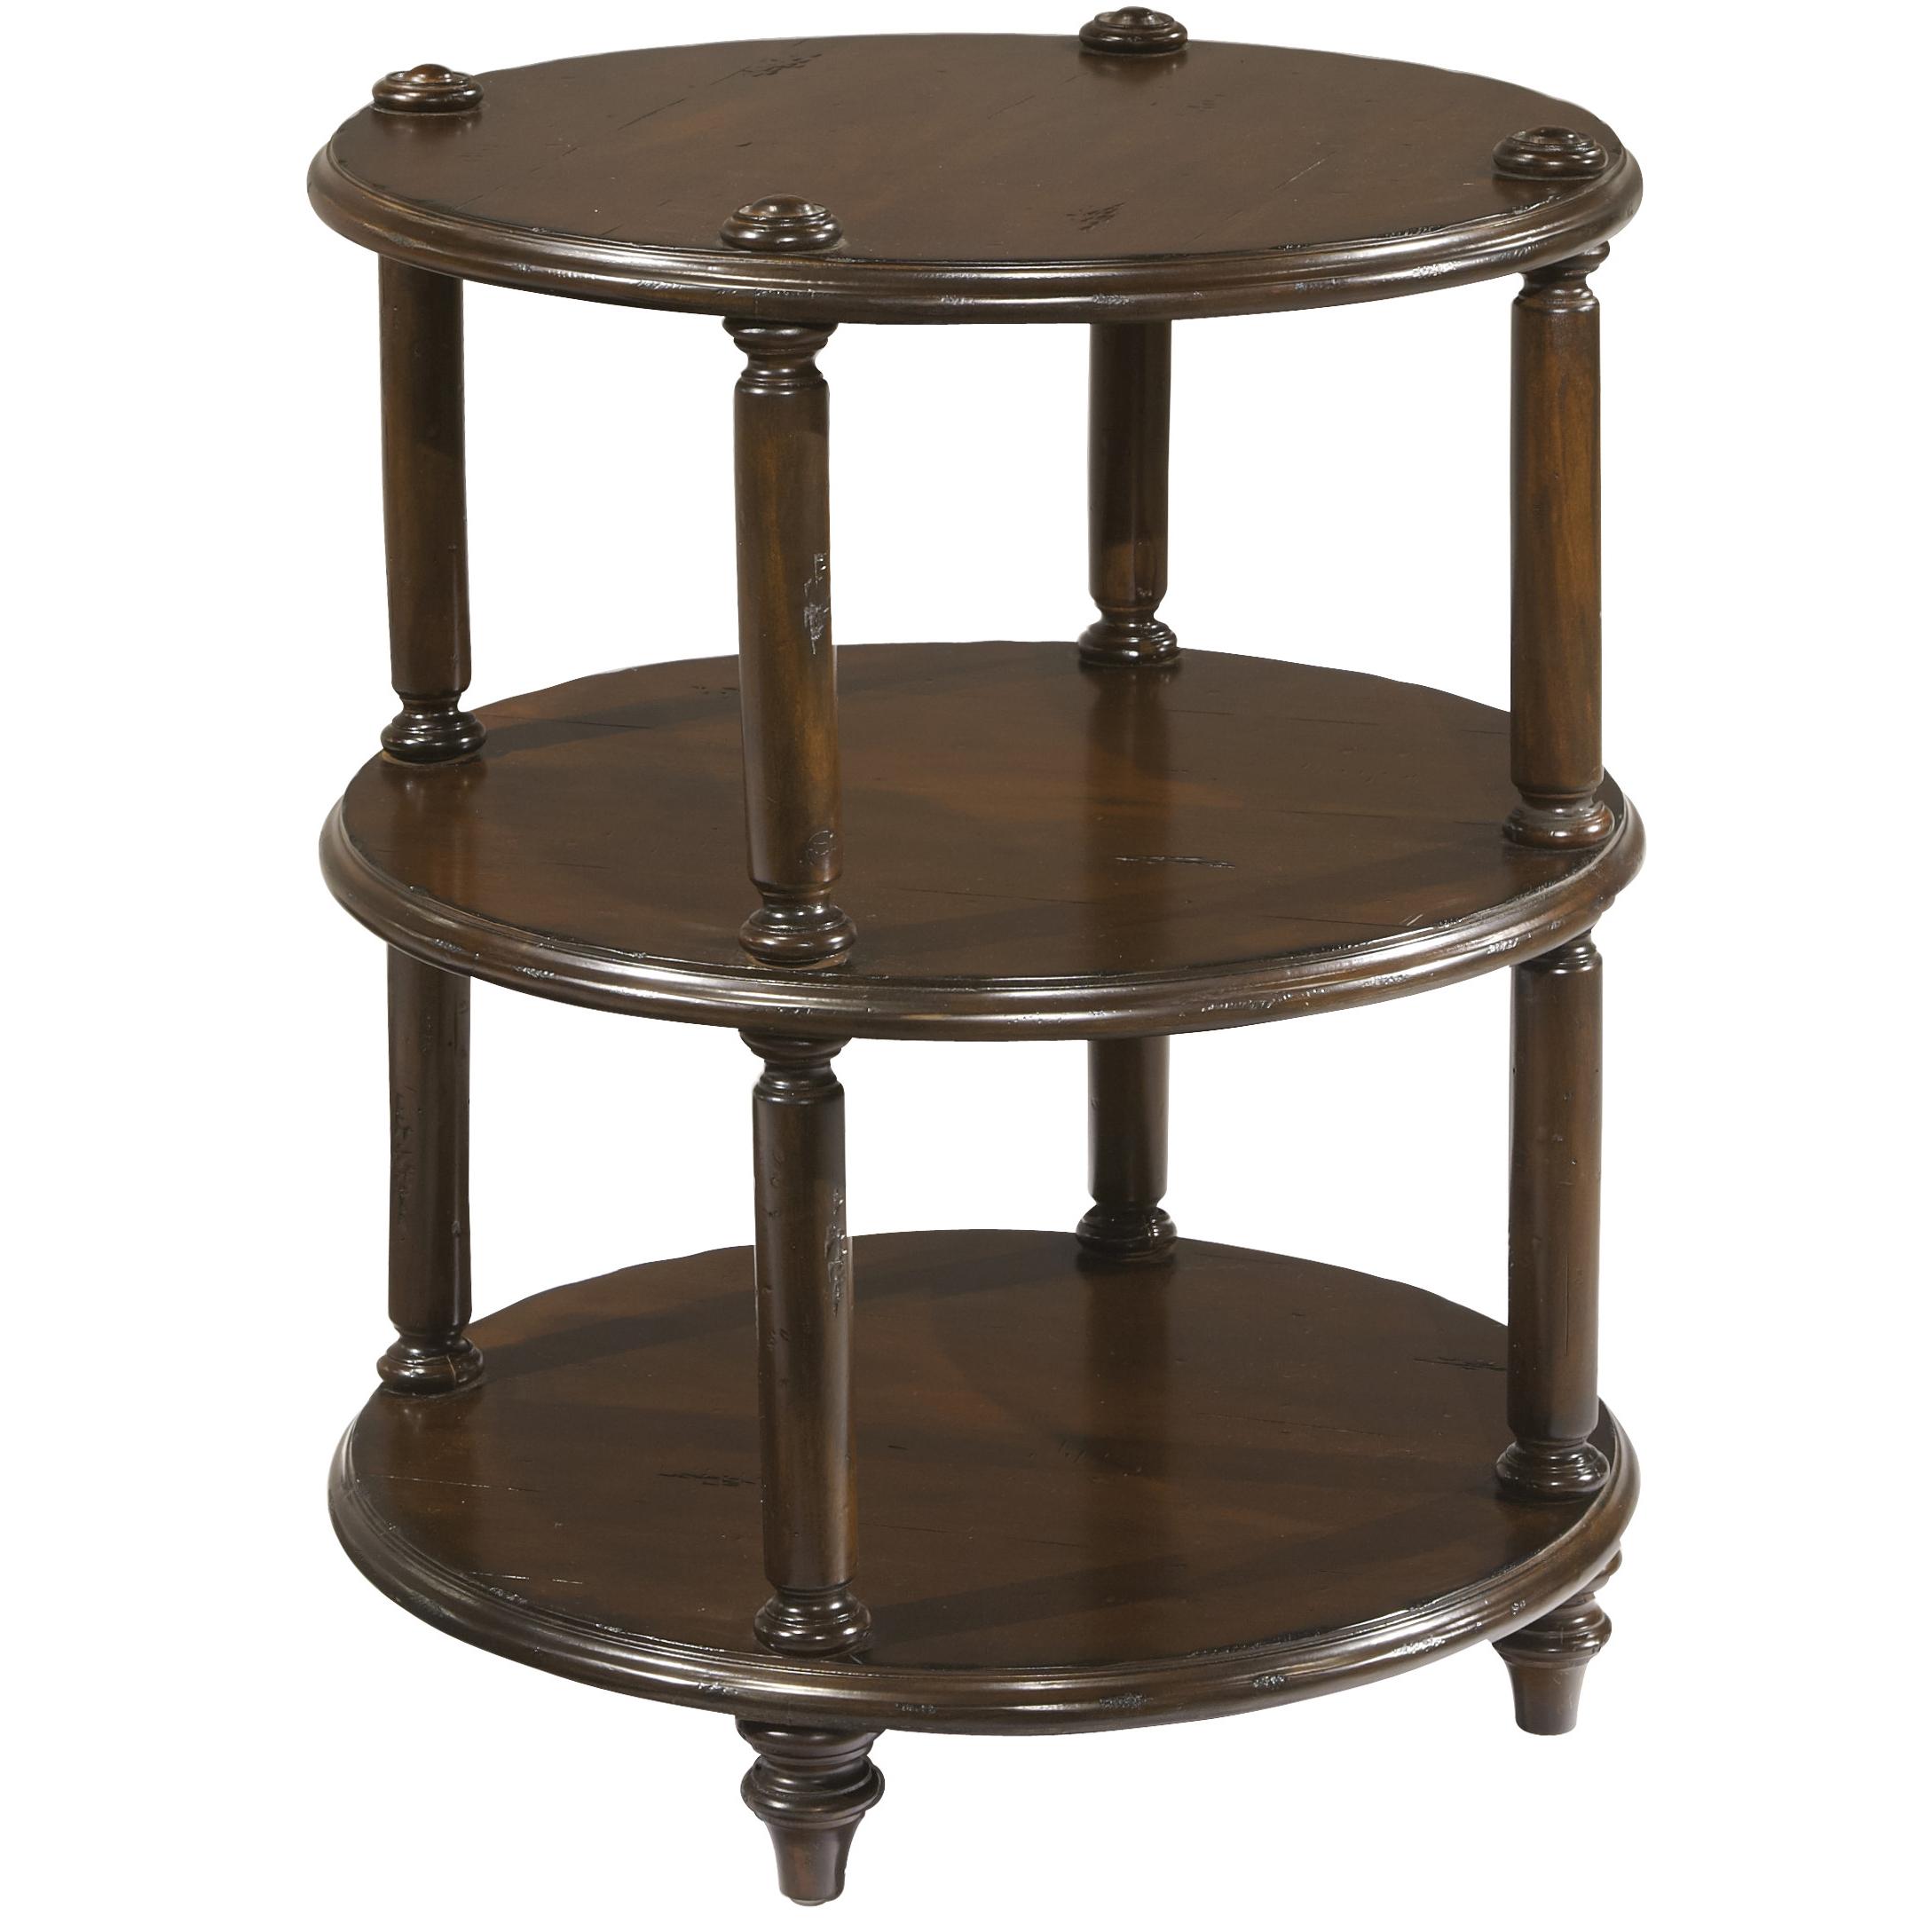 3 Tier Round Lamp Table